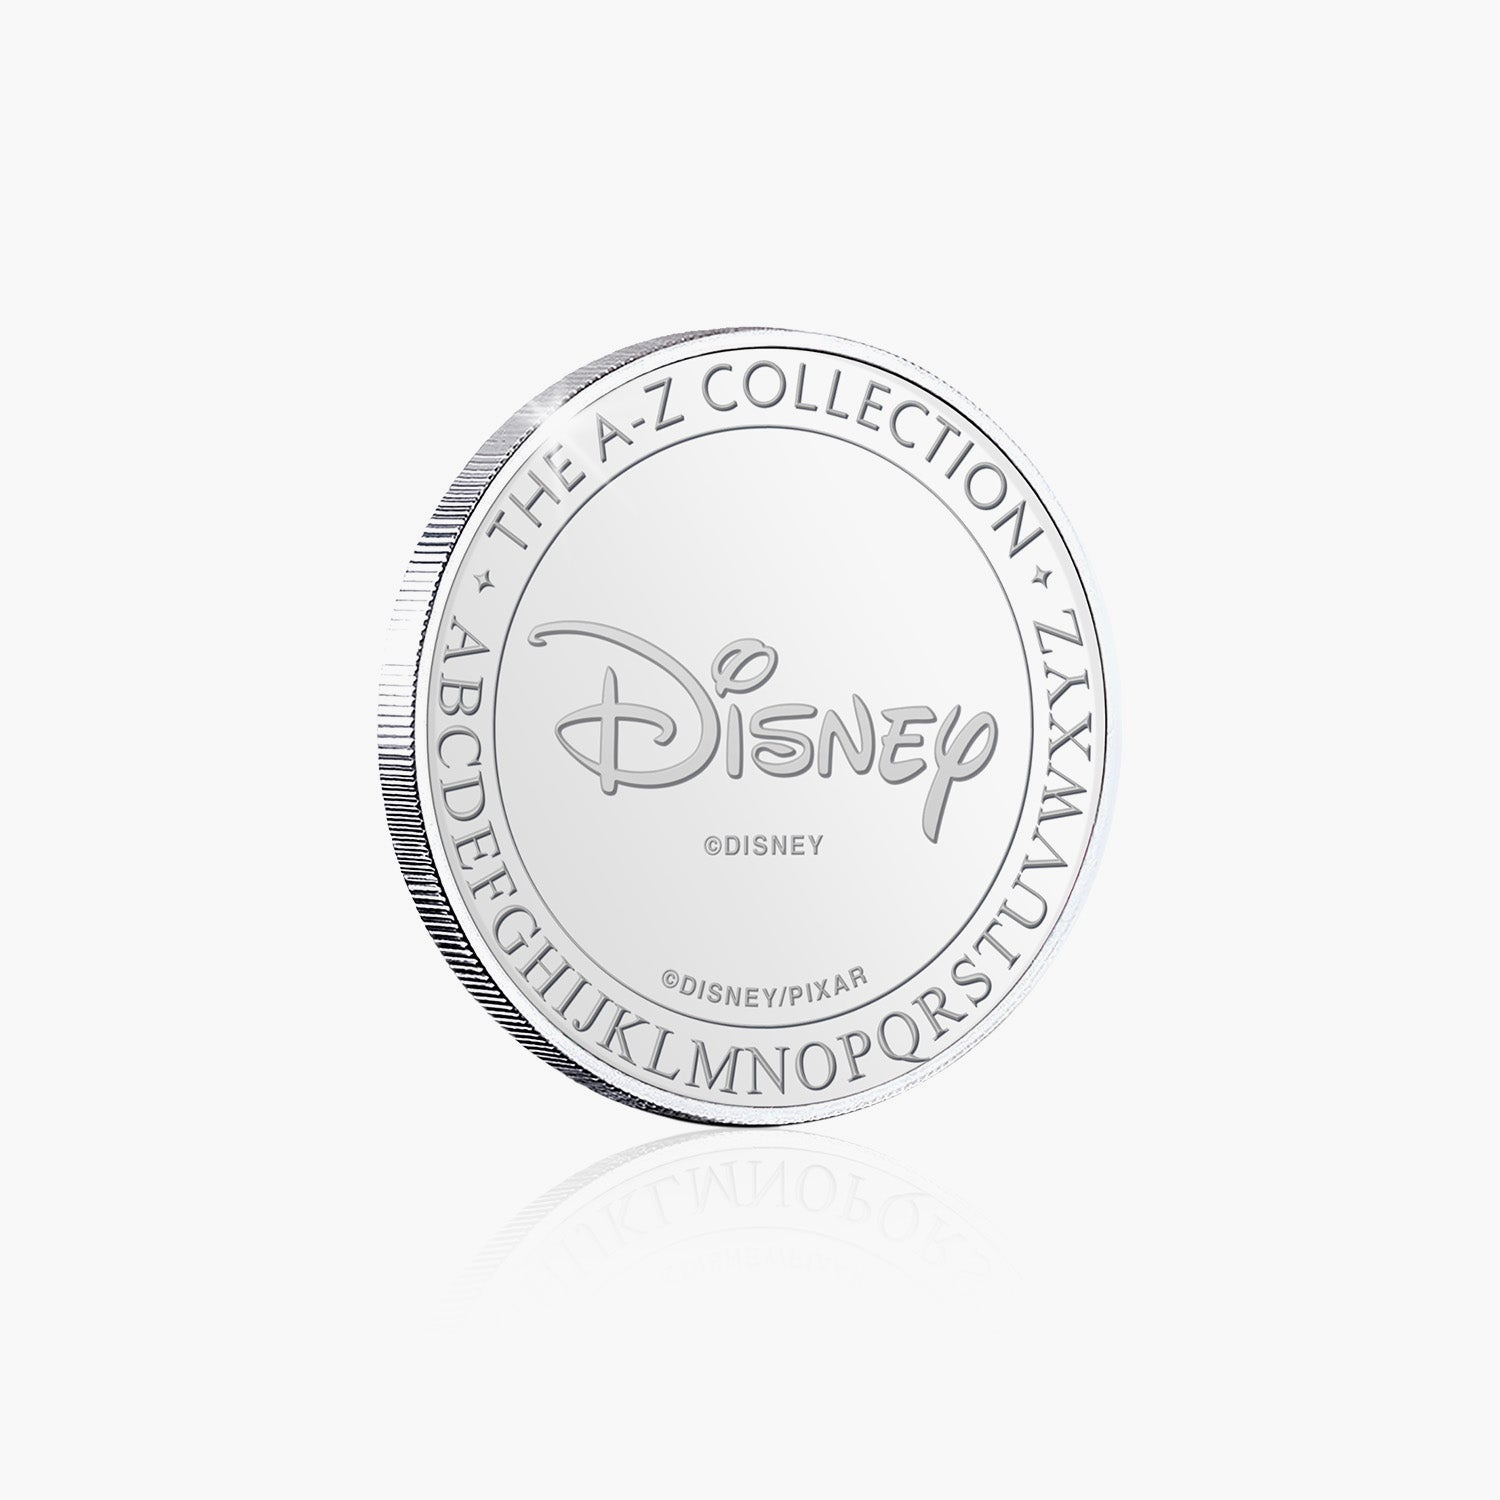 K Is For Kaa Silver-Plated Commemorative